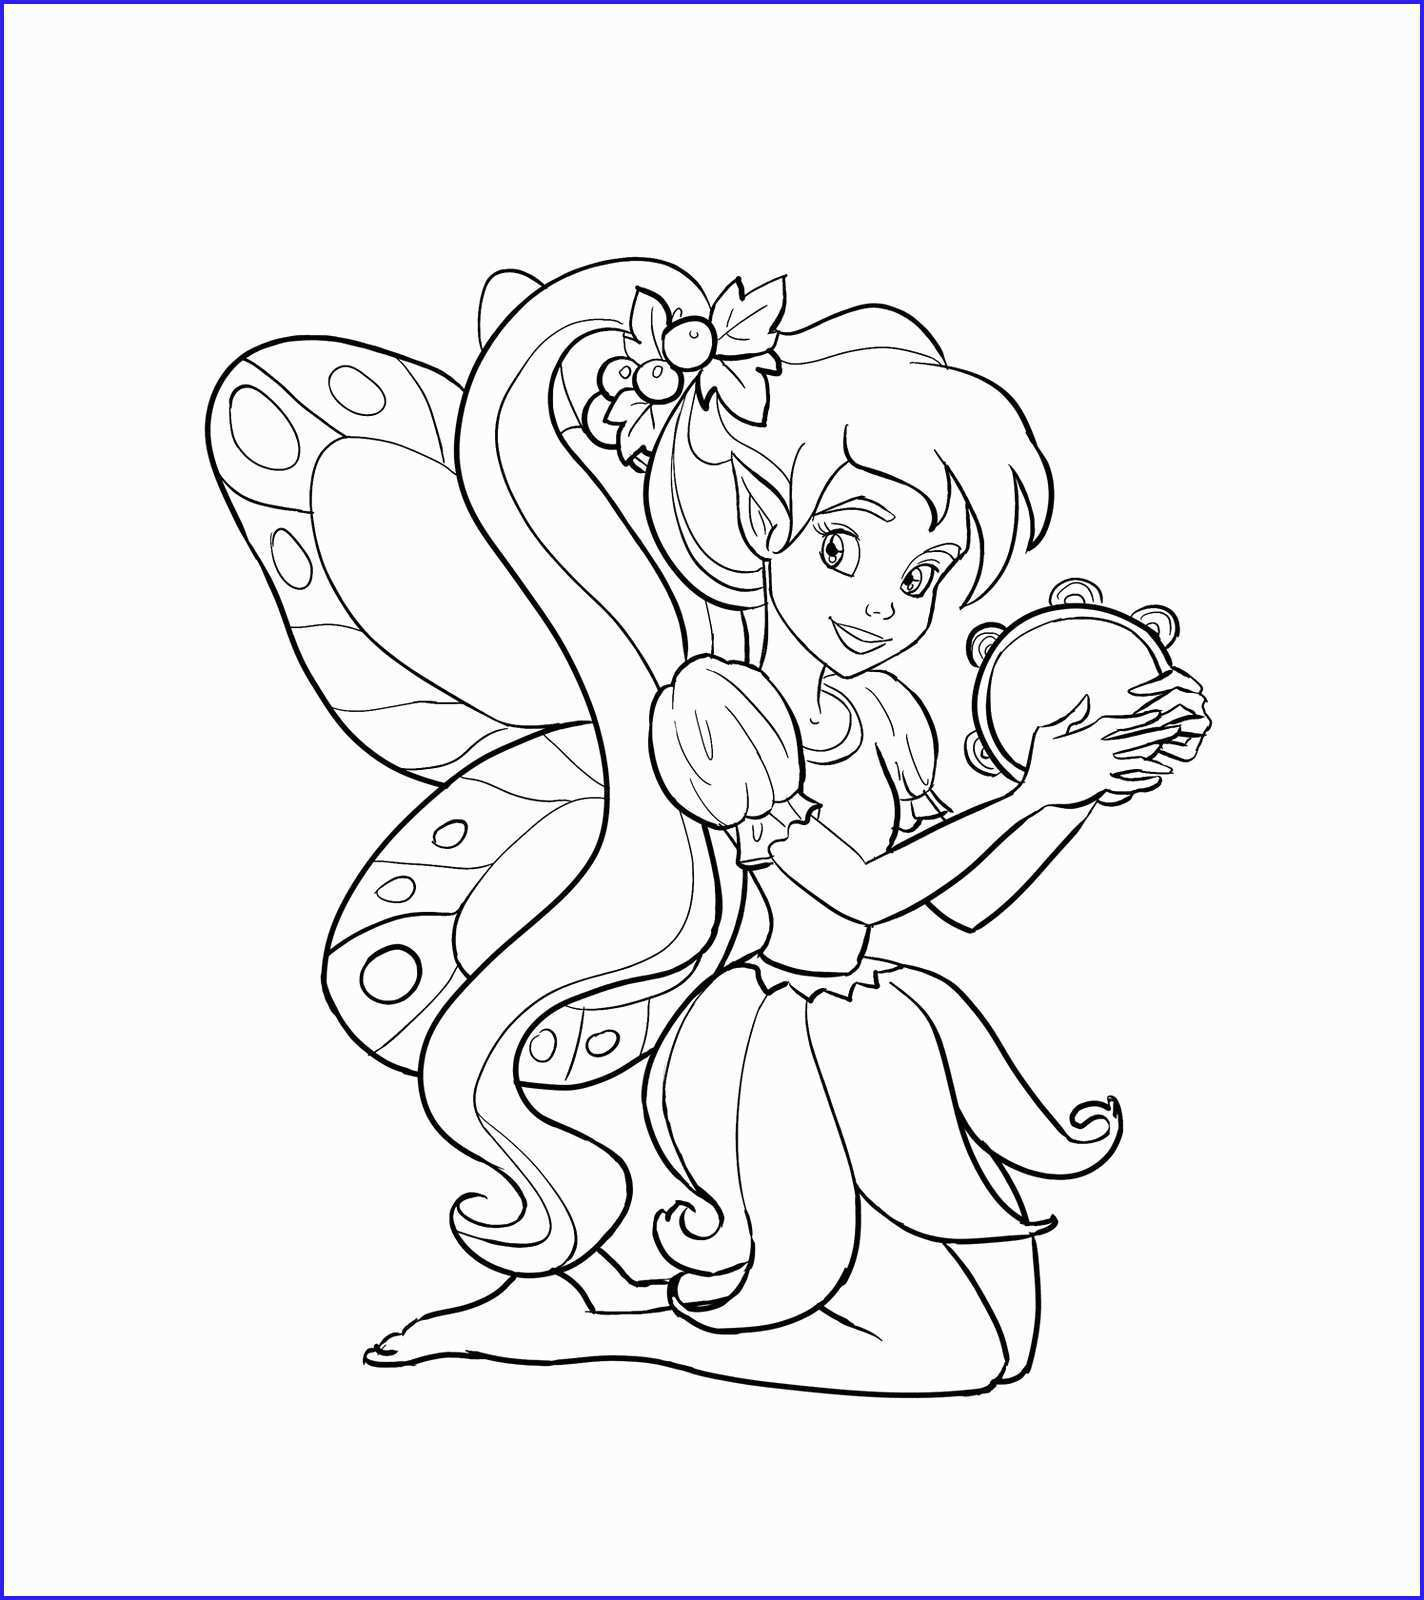 Free Printable Coloring Pages Fairies Adults Coloring Book Winking Fairy Coloring Page Free Printable Pages And